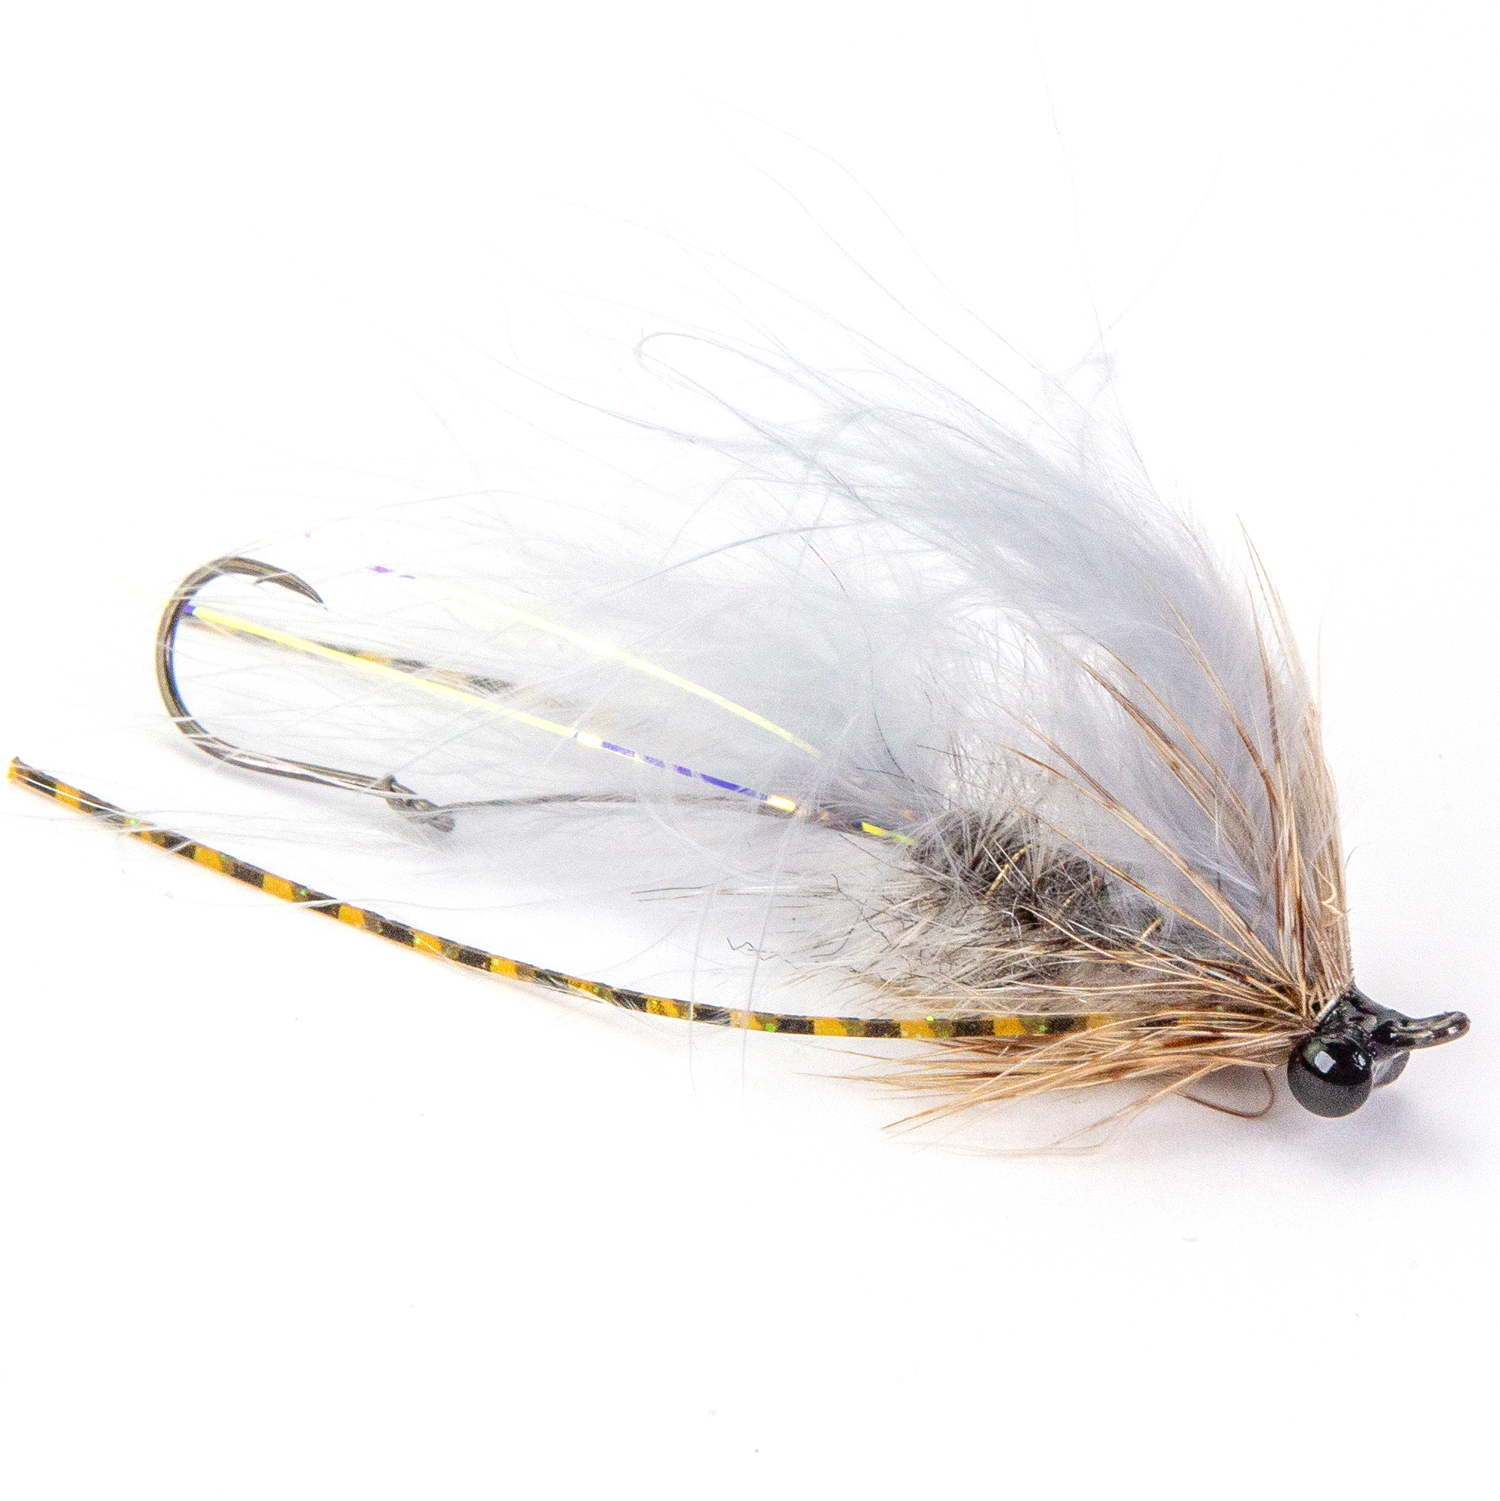 Rio Flies Trout Spey Assortment - Flies for Fly Fishing